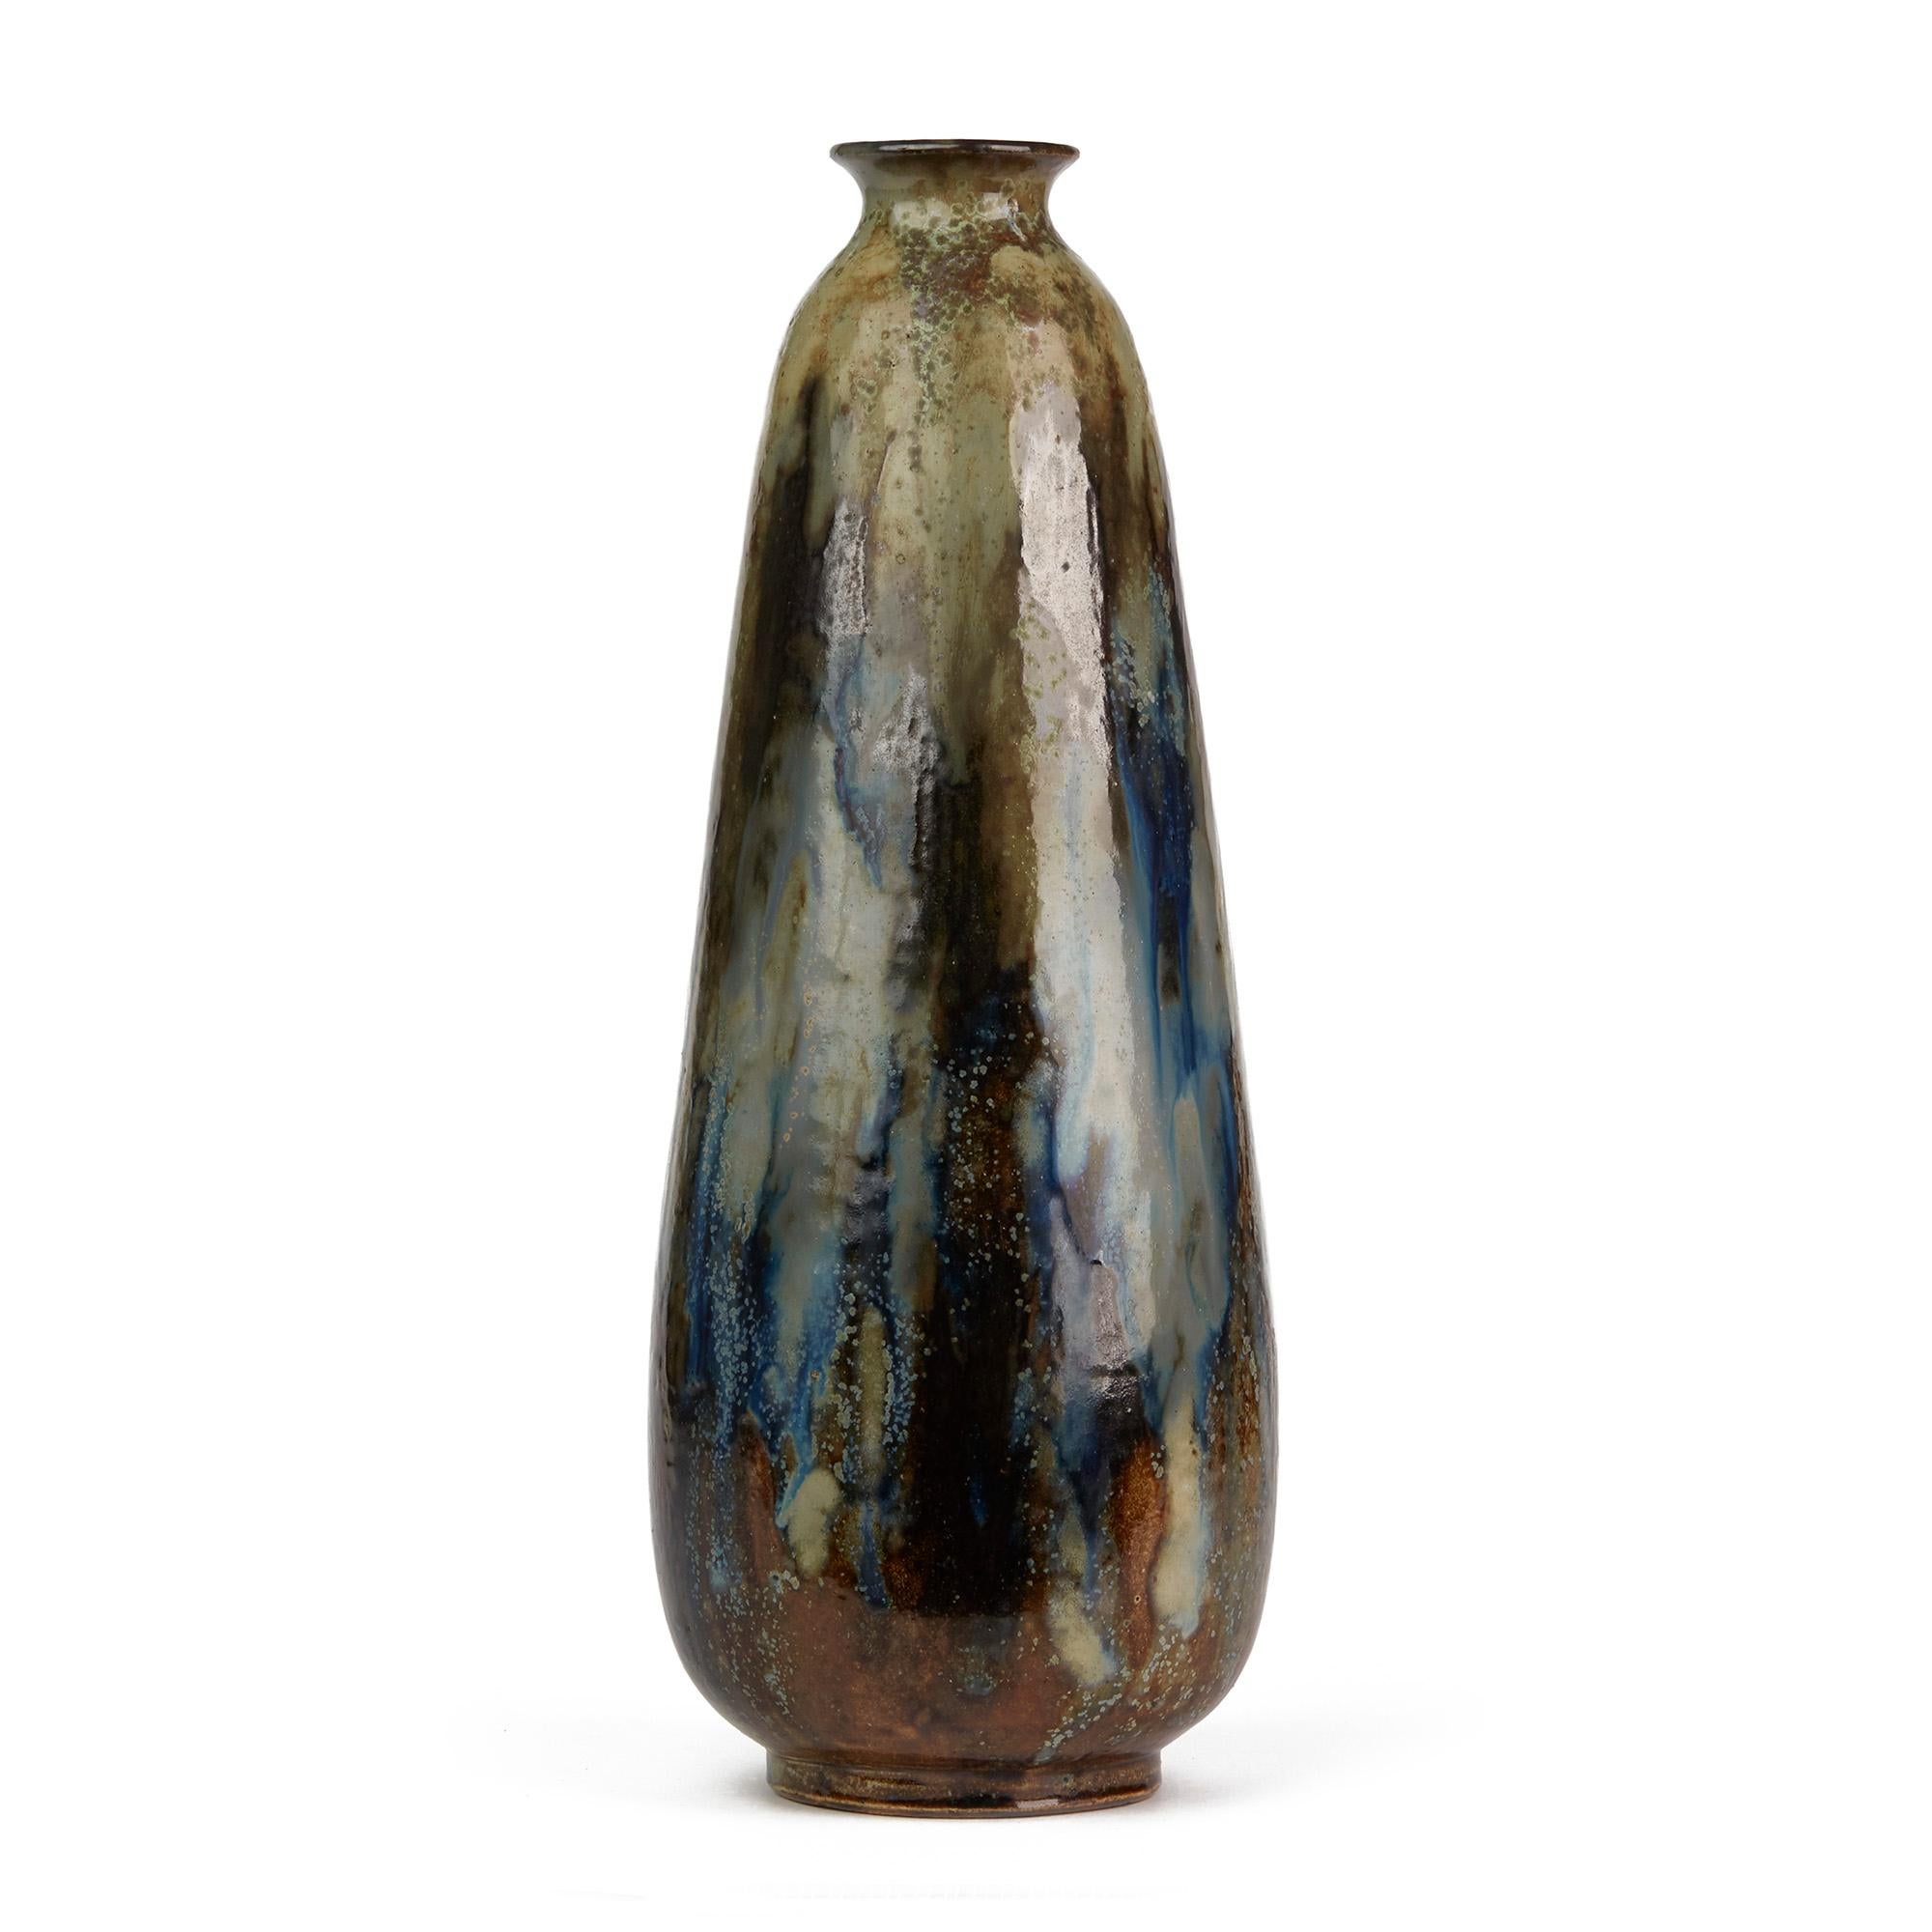 A stunning and exceptionally glazed Belgian art pottery stoneware vase by Roger Guérin and dating from circa 1930. This tall bottle shaped vase stands on a narrow rounded base and is decorated with colored streaked glazes in tones of brown, blue and